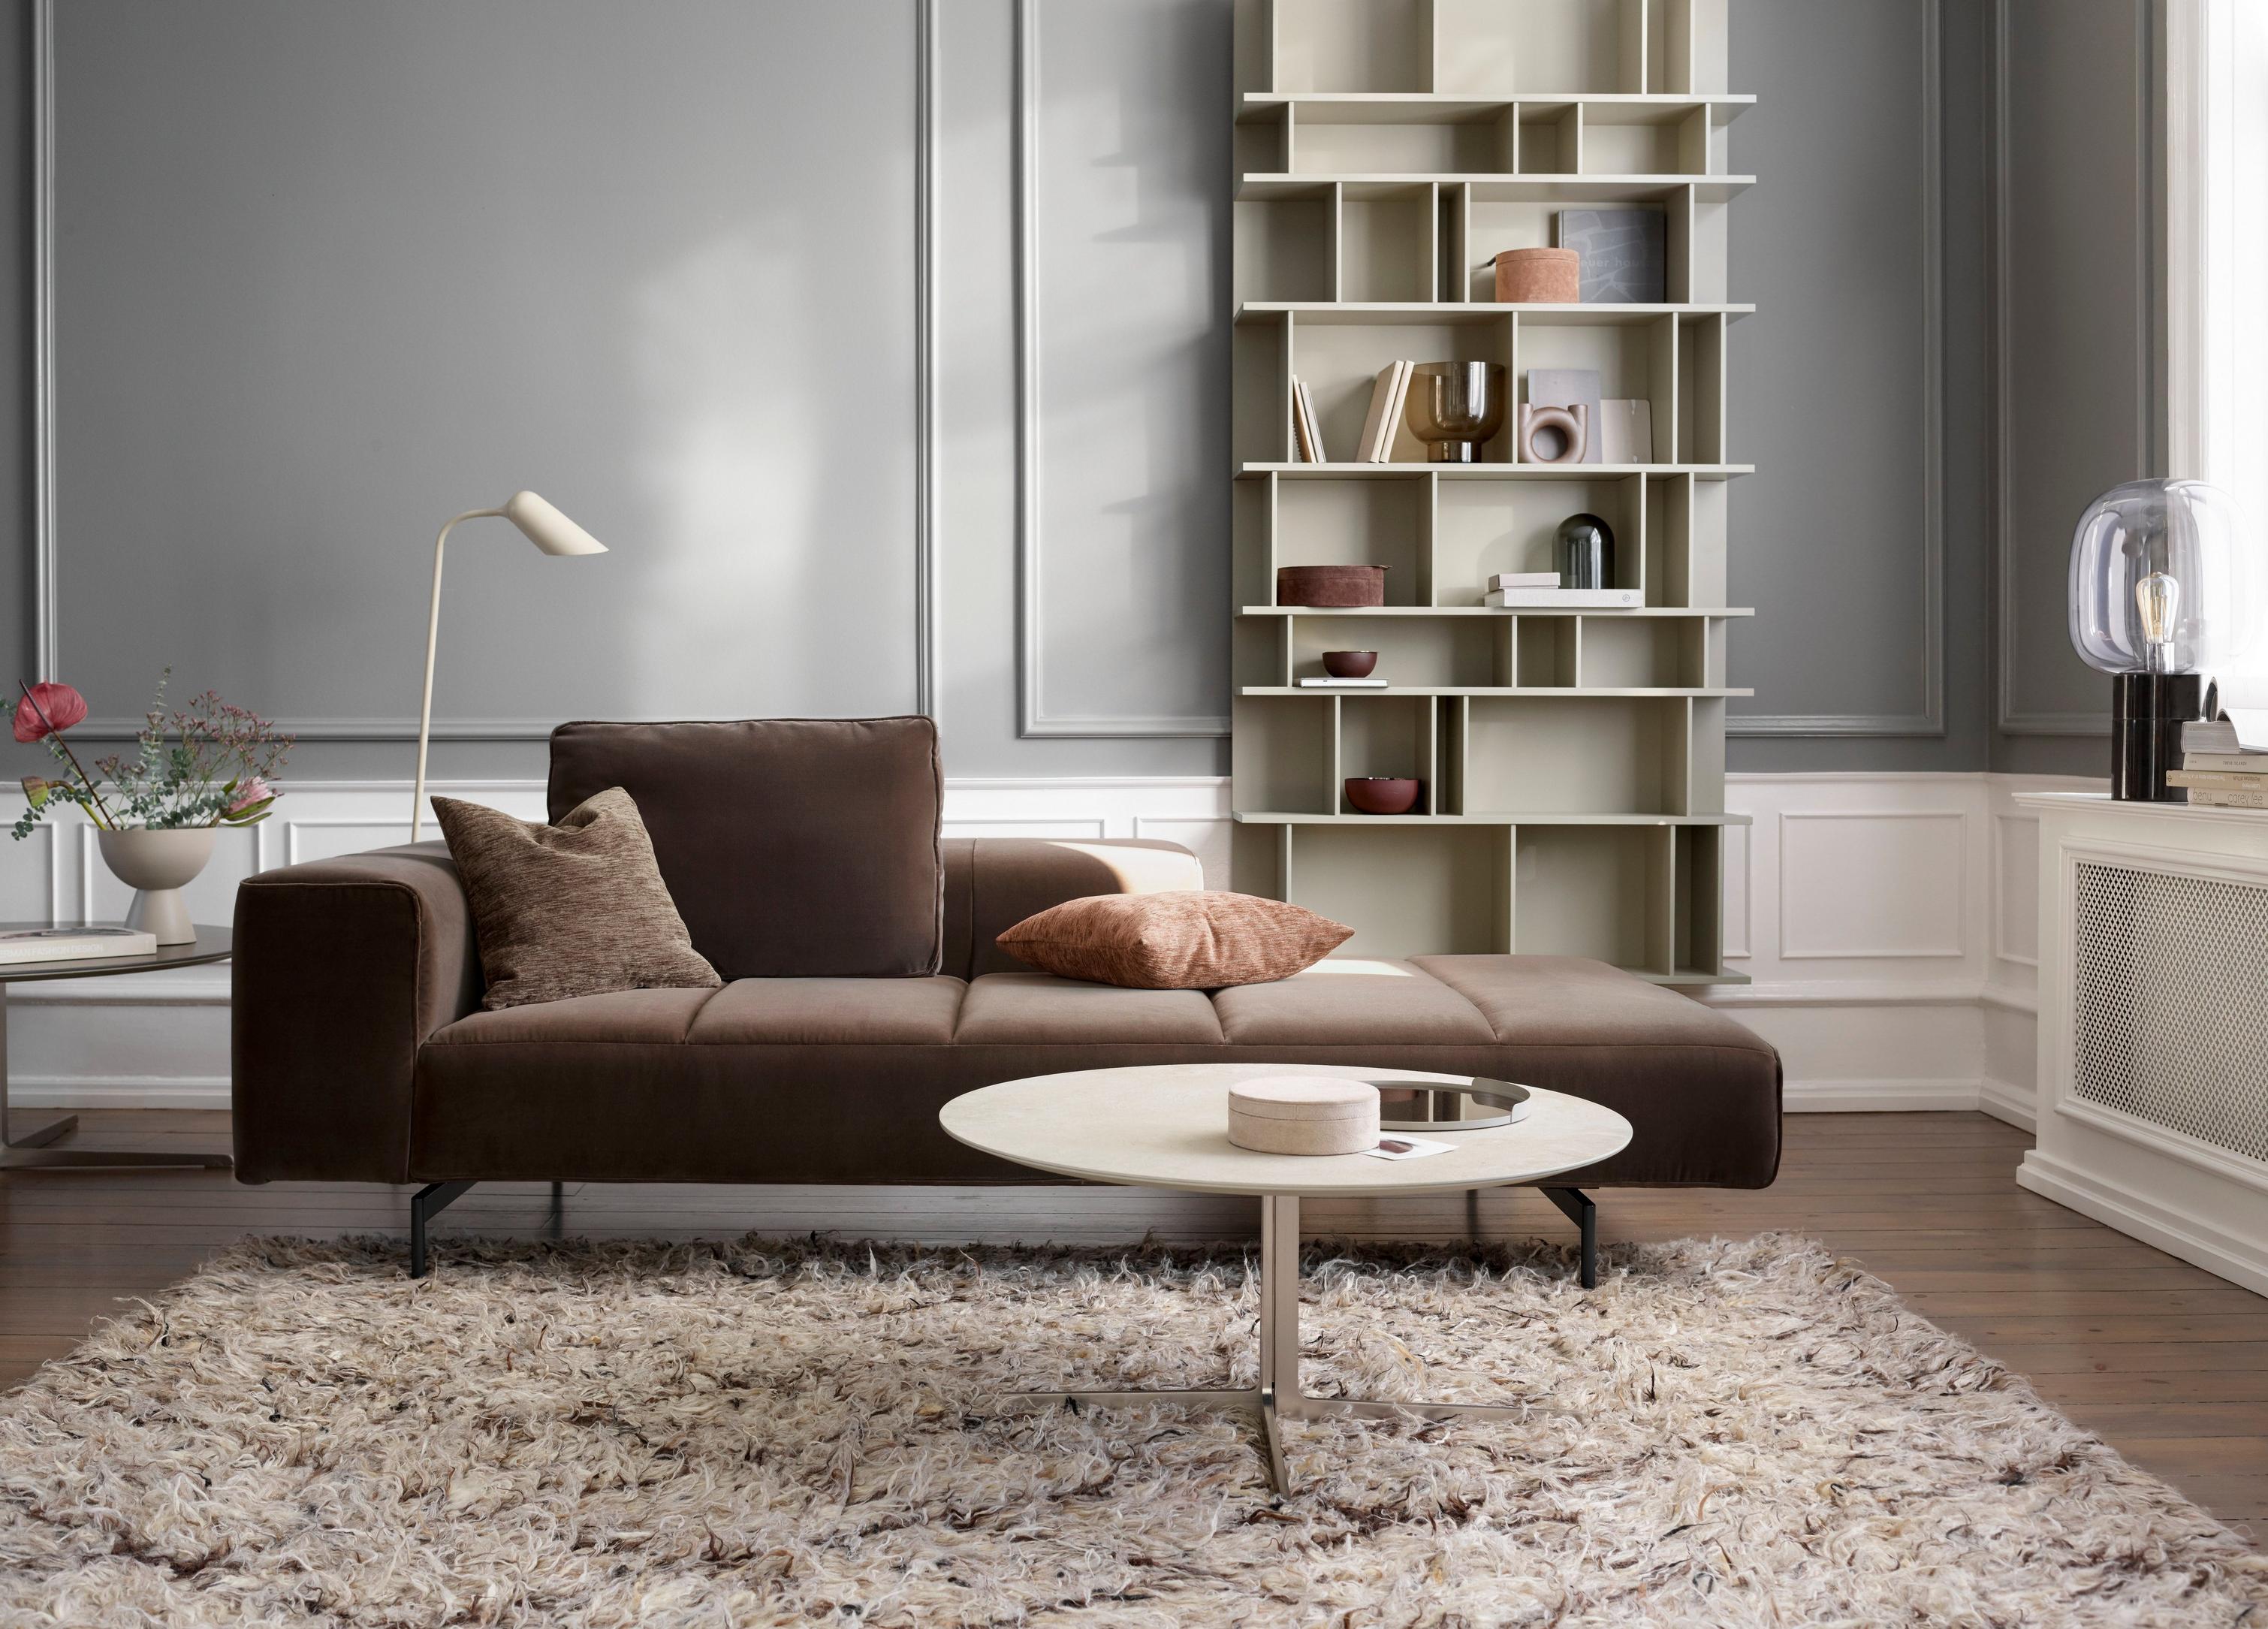 The Amsterdam Iounging sofa in a living room with the Como wall system.